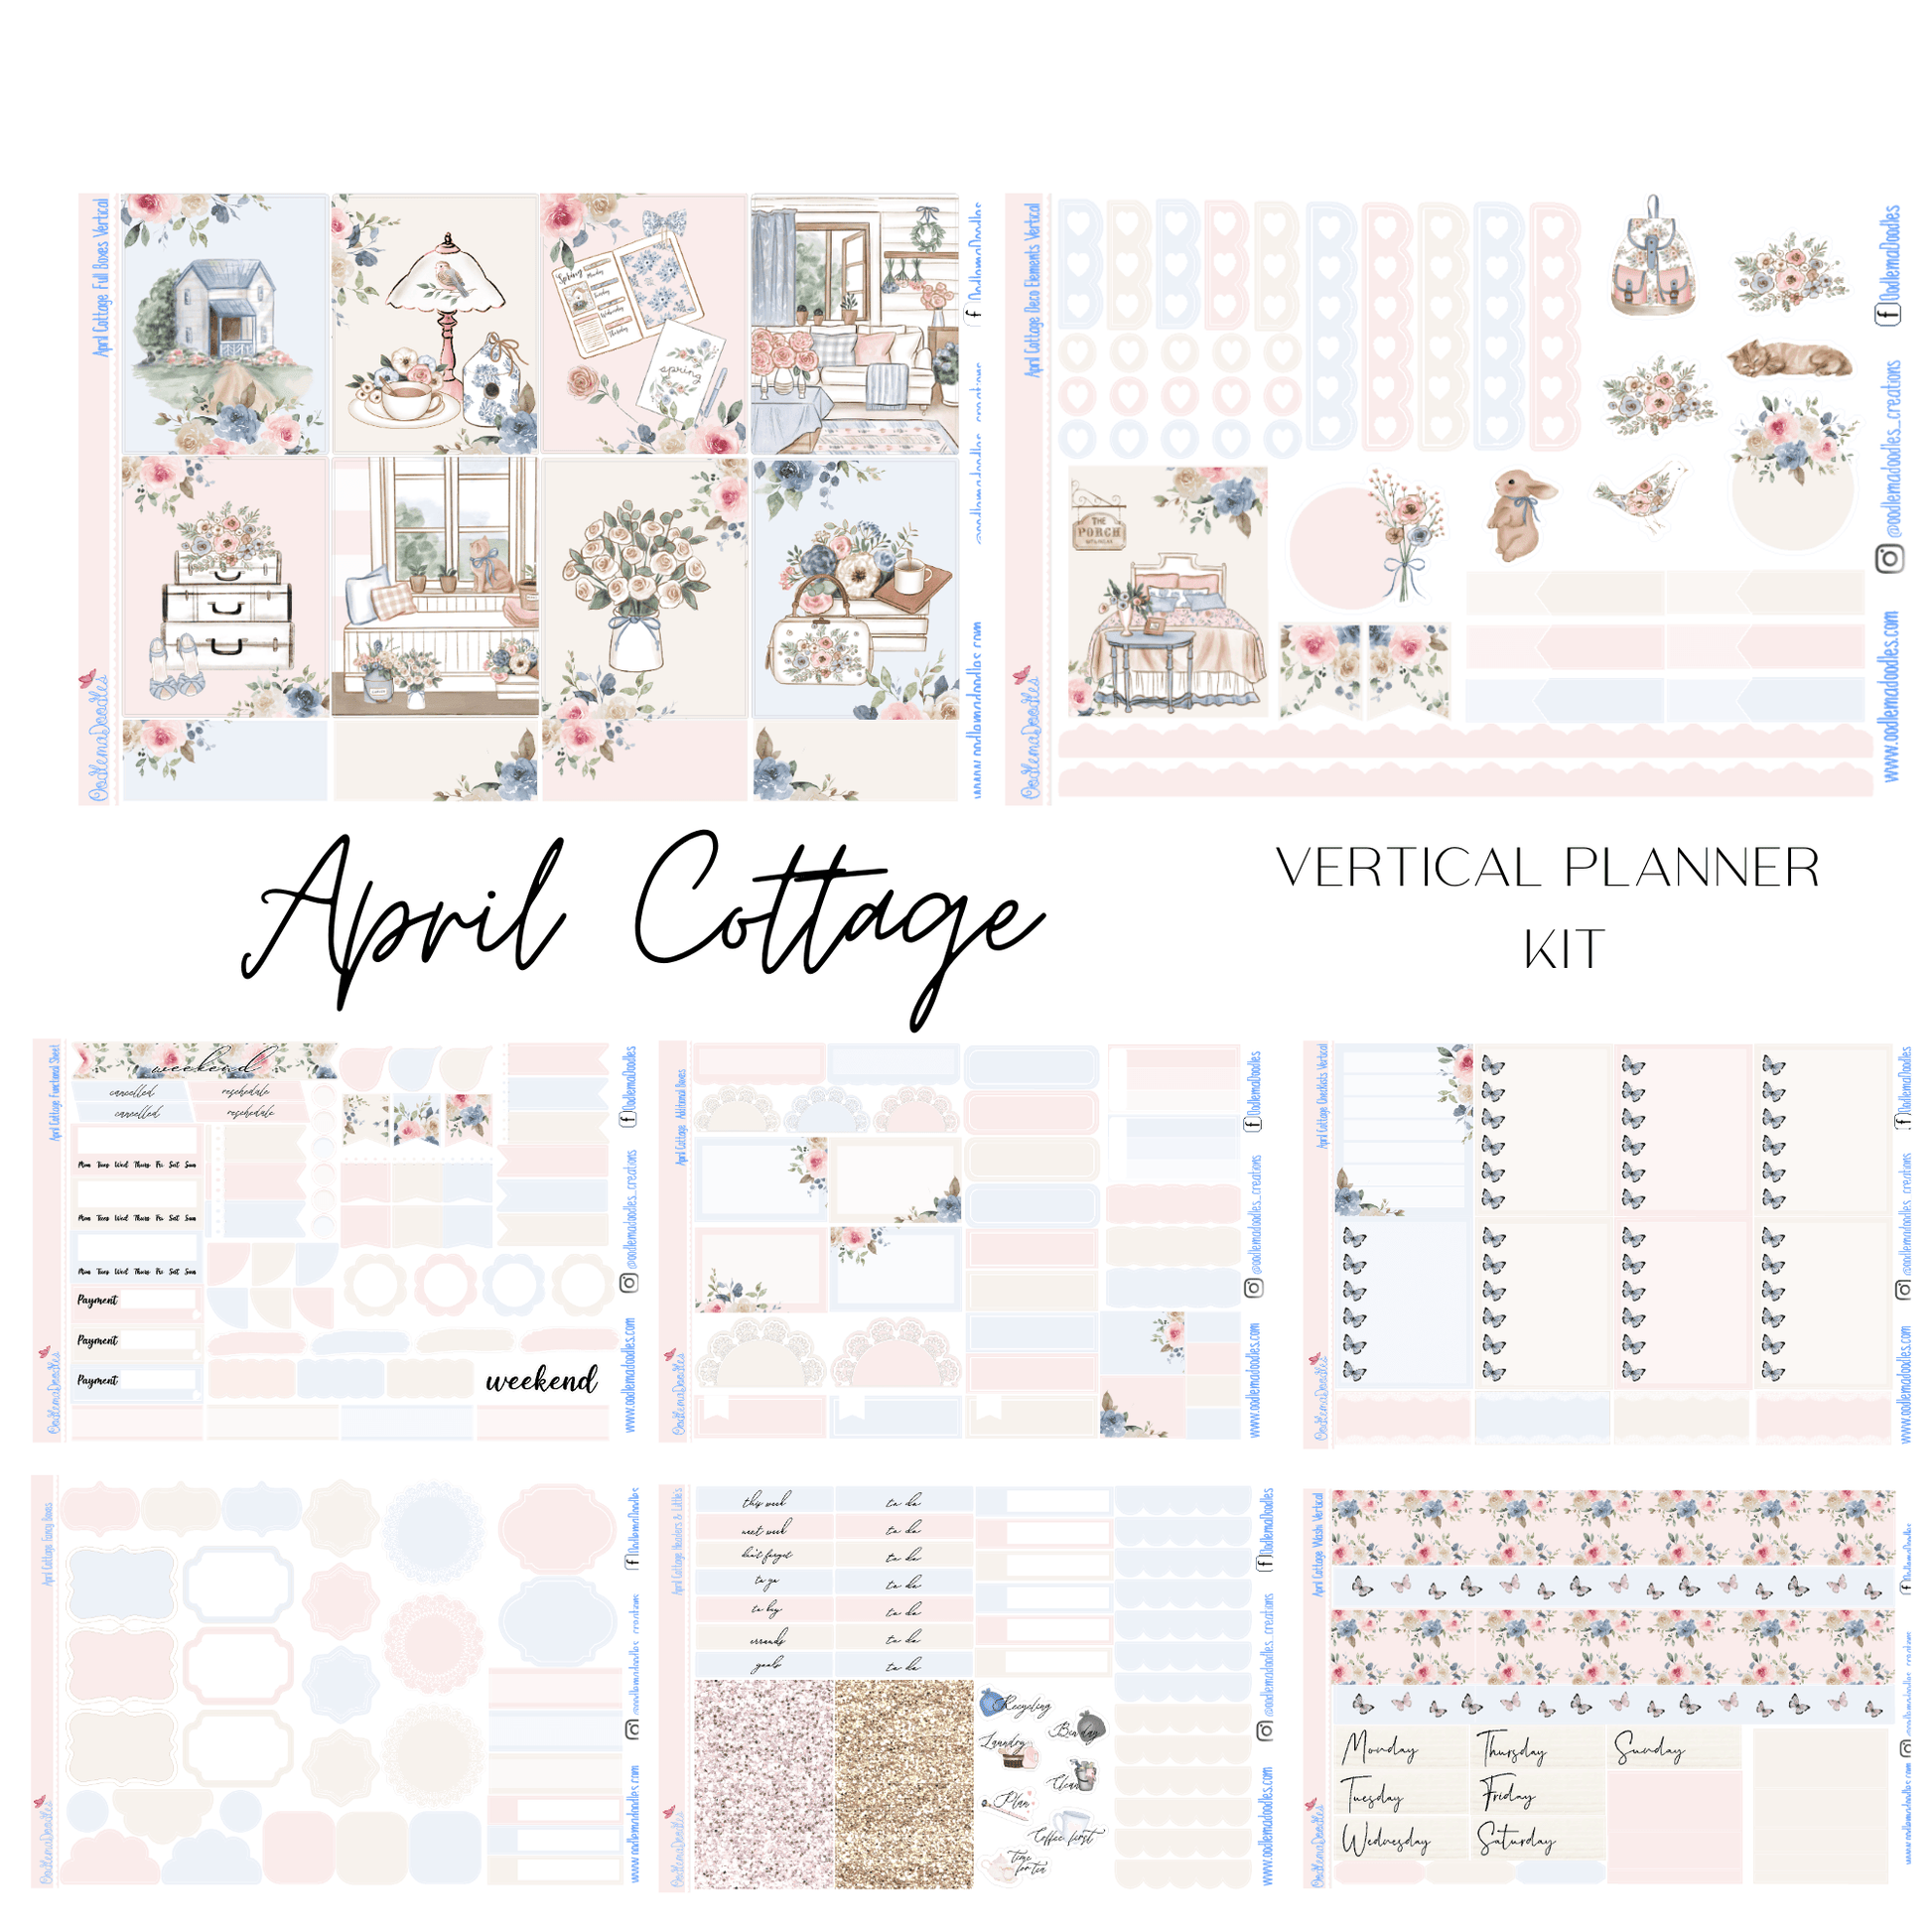 April Cottage Vertical Weekly - oodlemadoodles